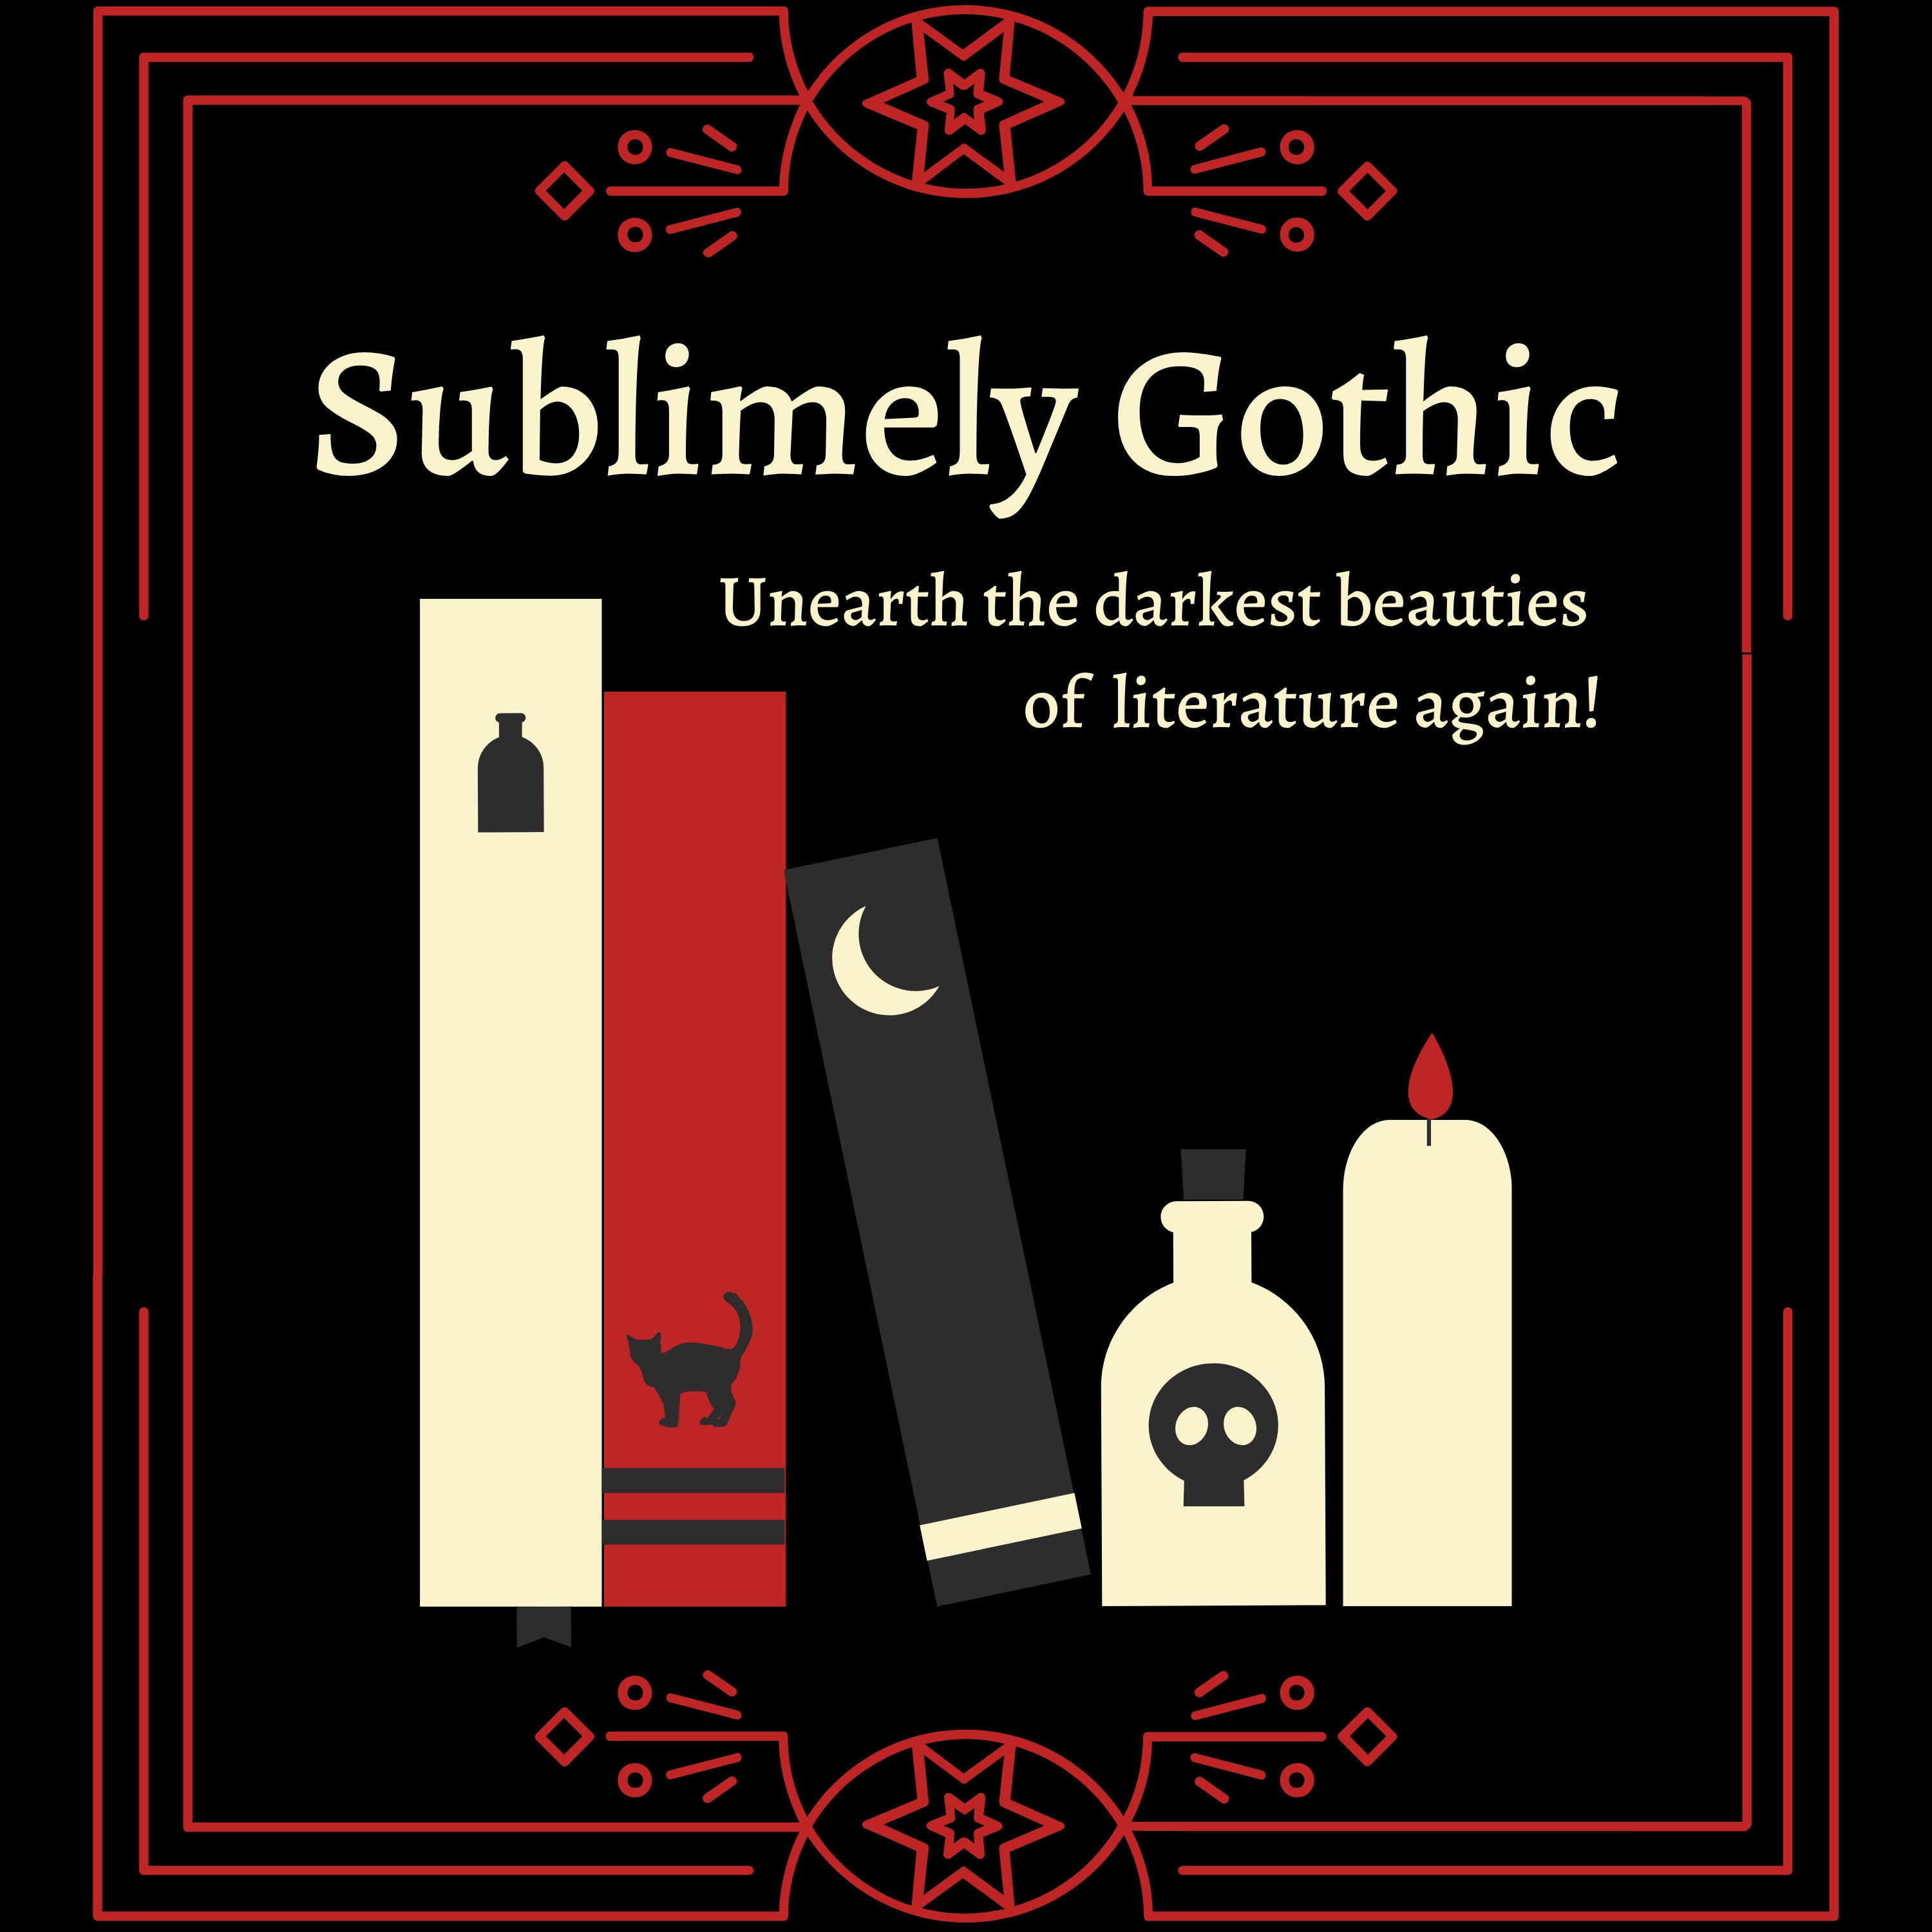 Sublimely Gothic: The Wife Upstairs